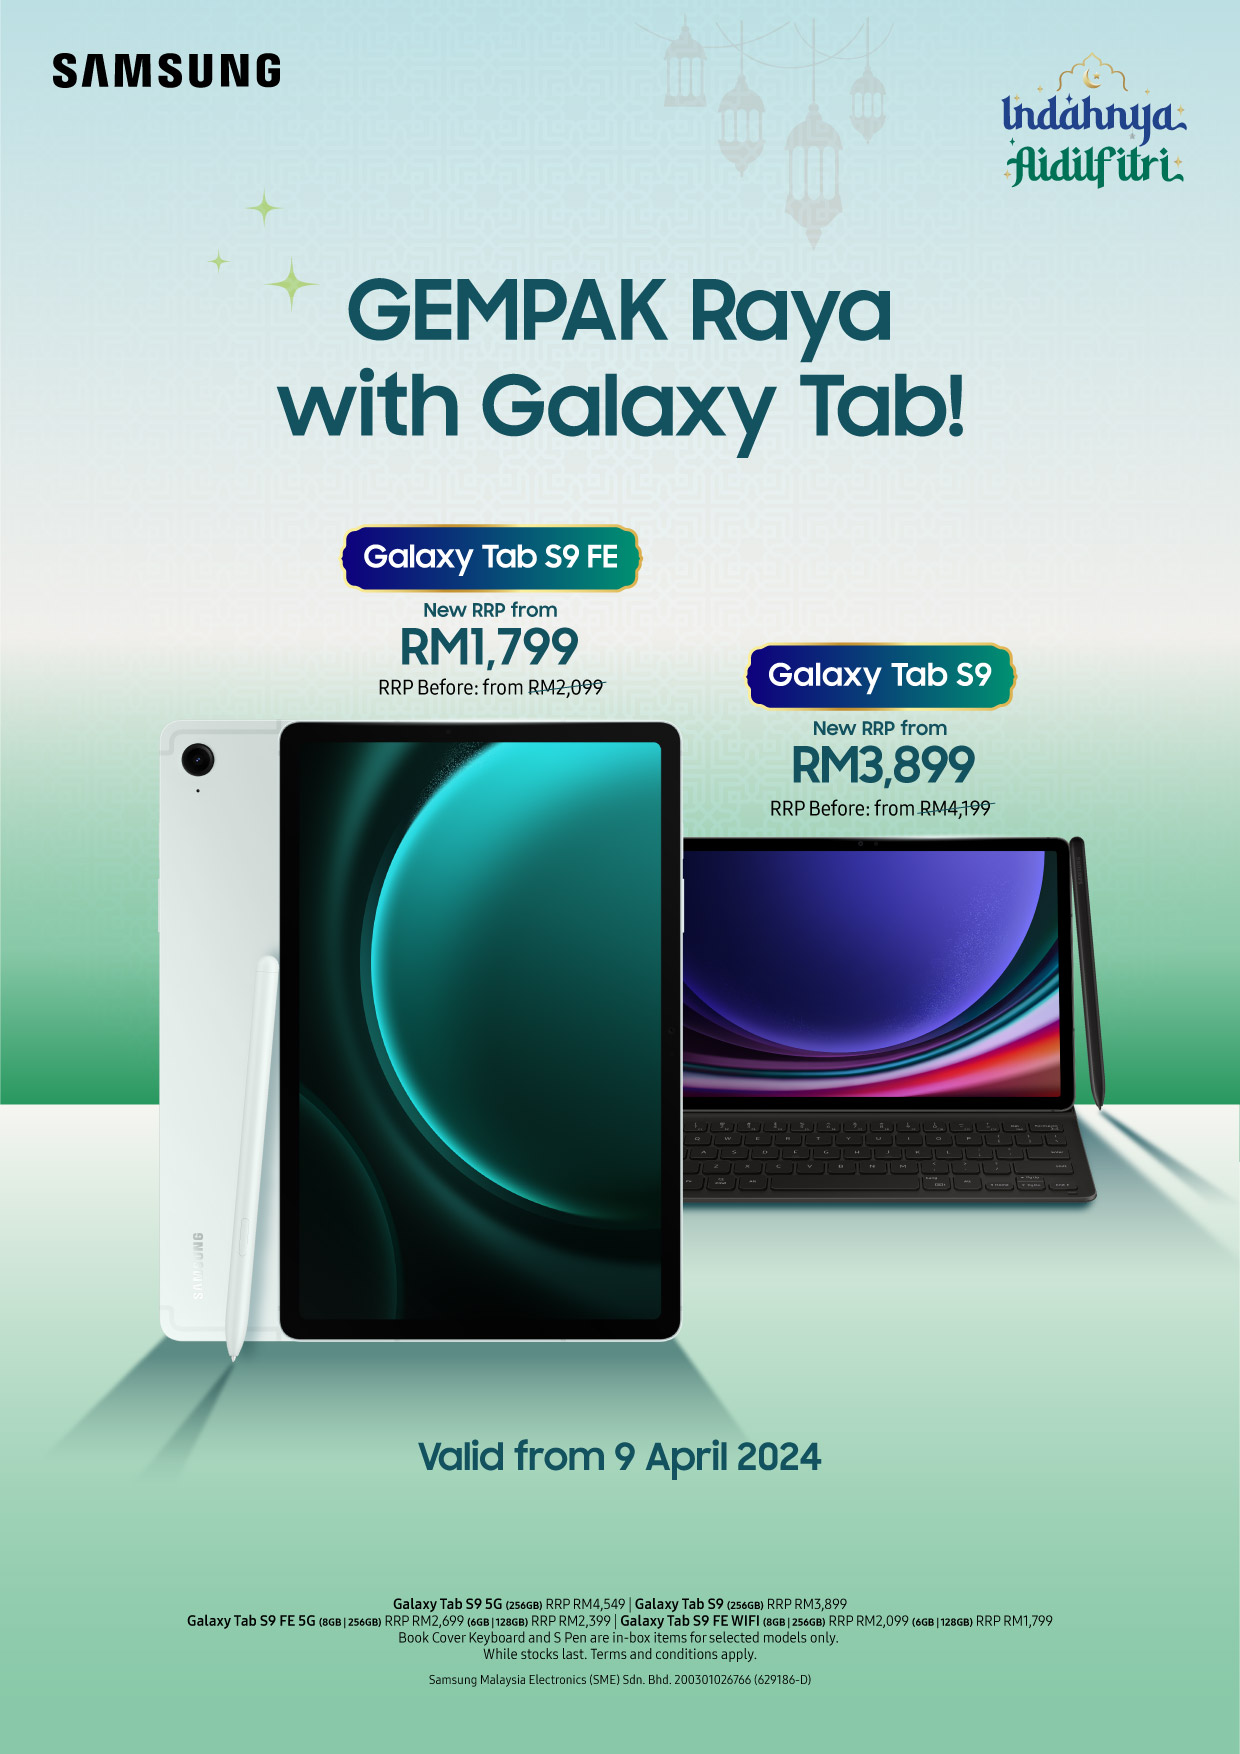 Samsung reduces prices on Galaxy Tab S9 series tablets, up to RM300 cheaper now